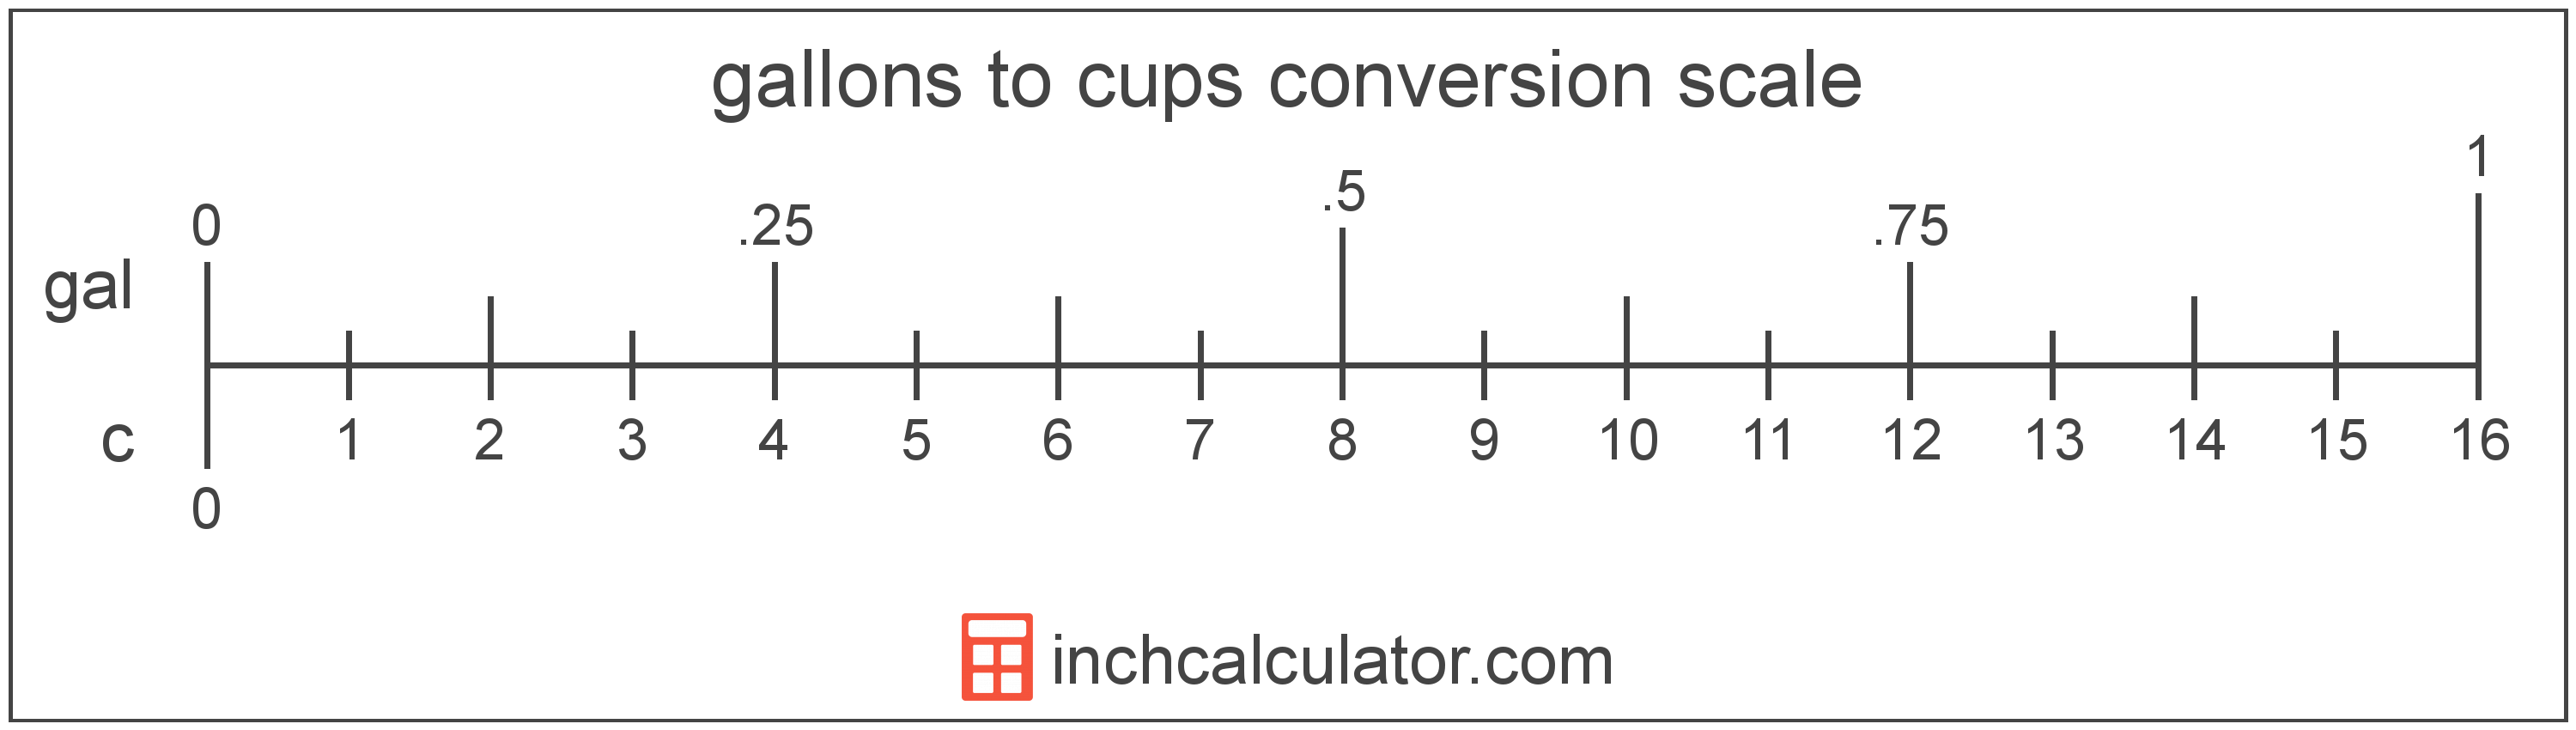 Conversion Cups To Gallons Chart